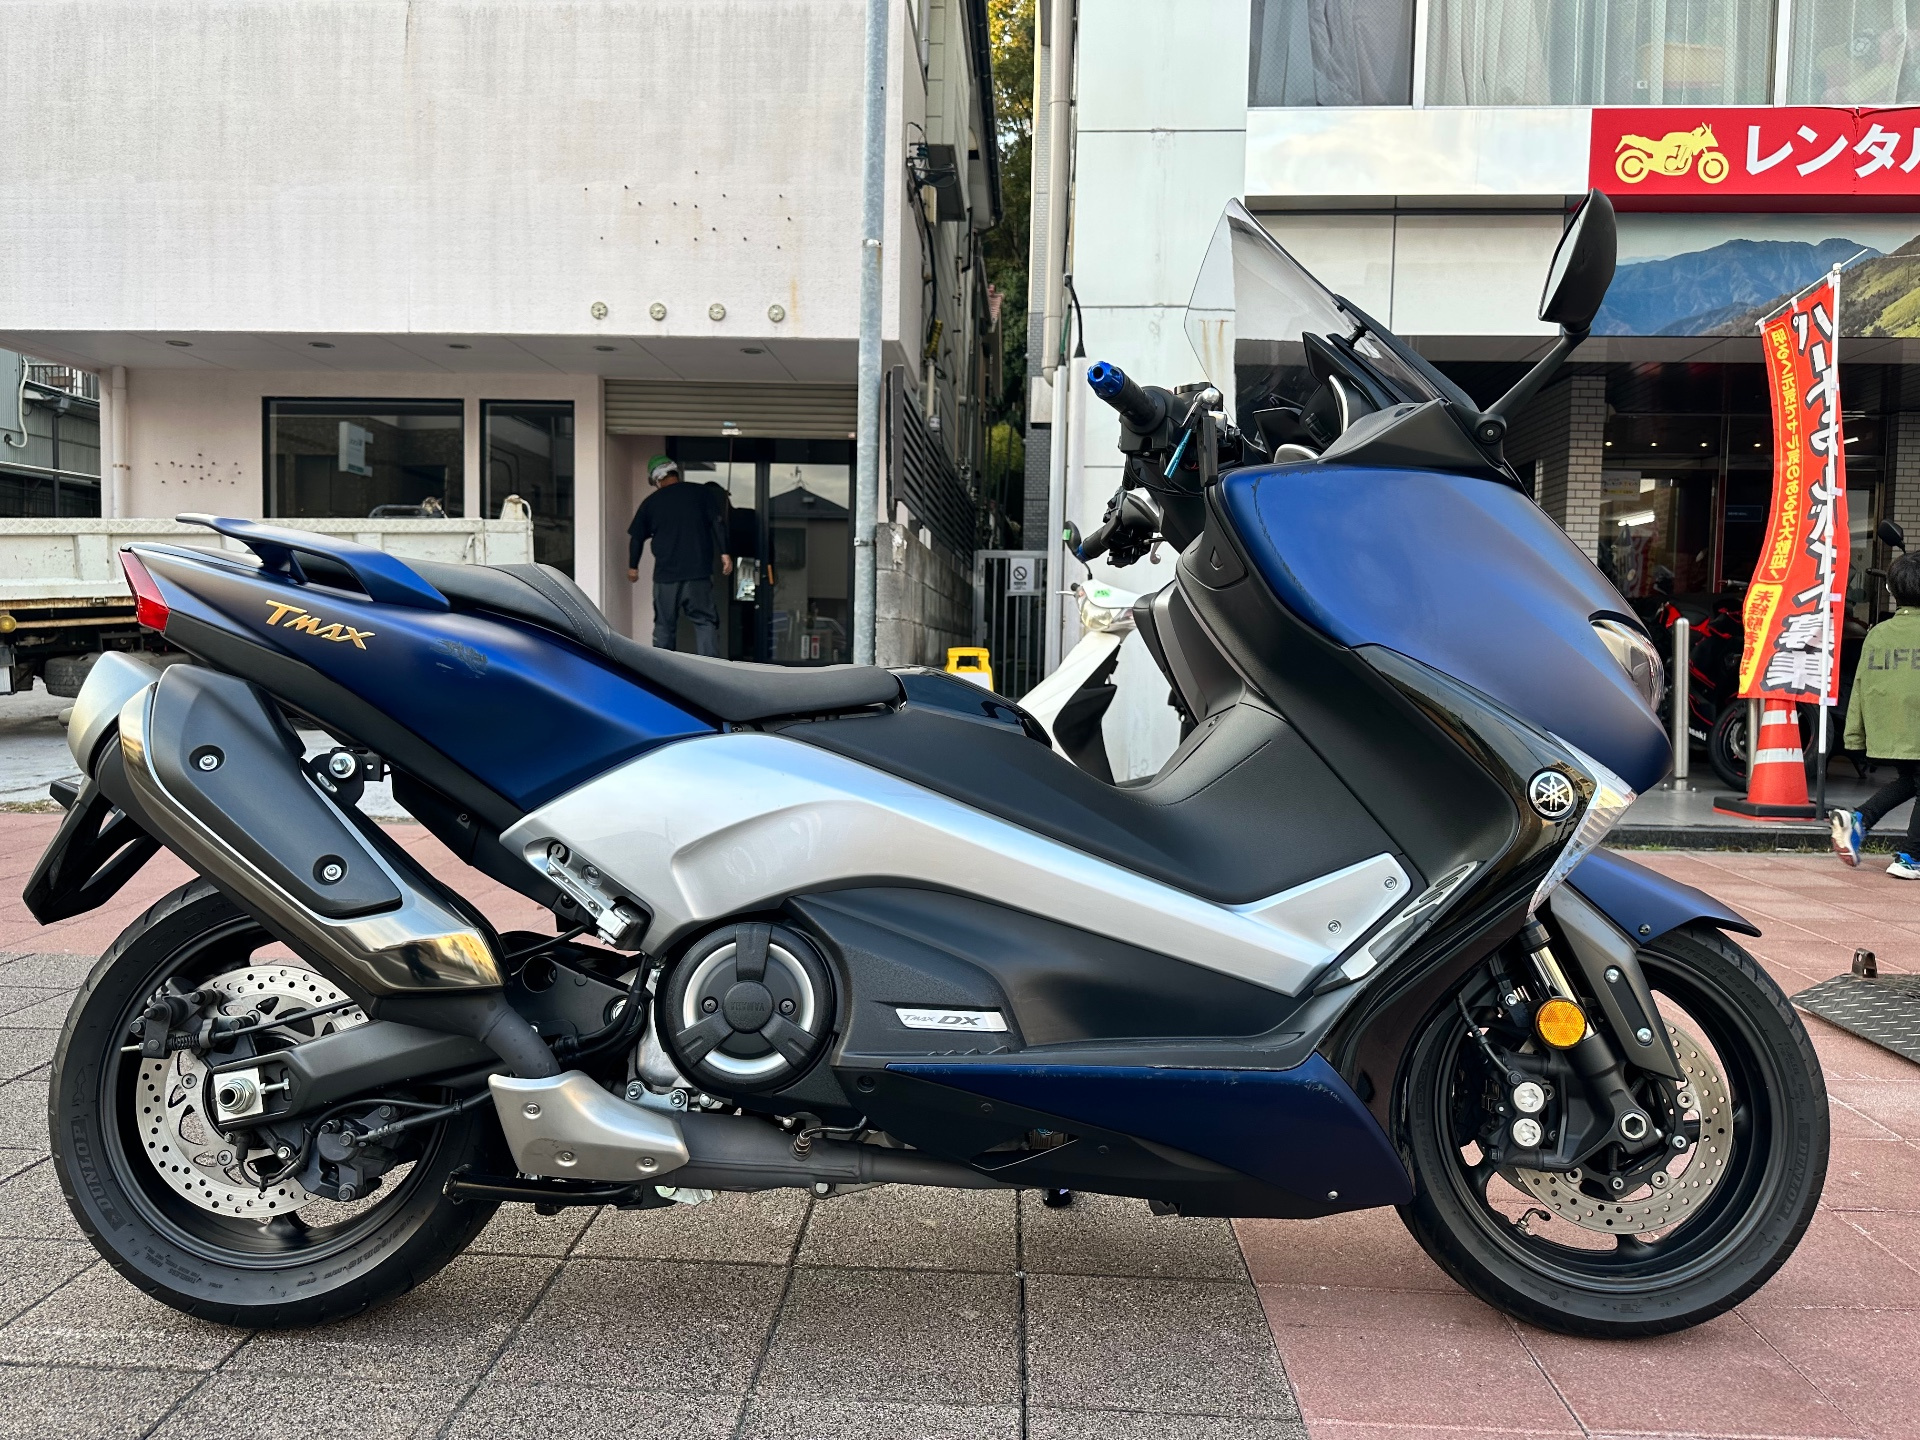 OTHER T-MAX530 DX ABS (13257км)